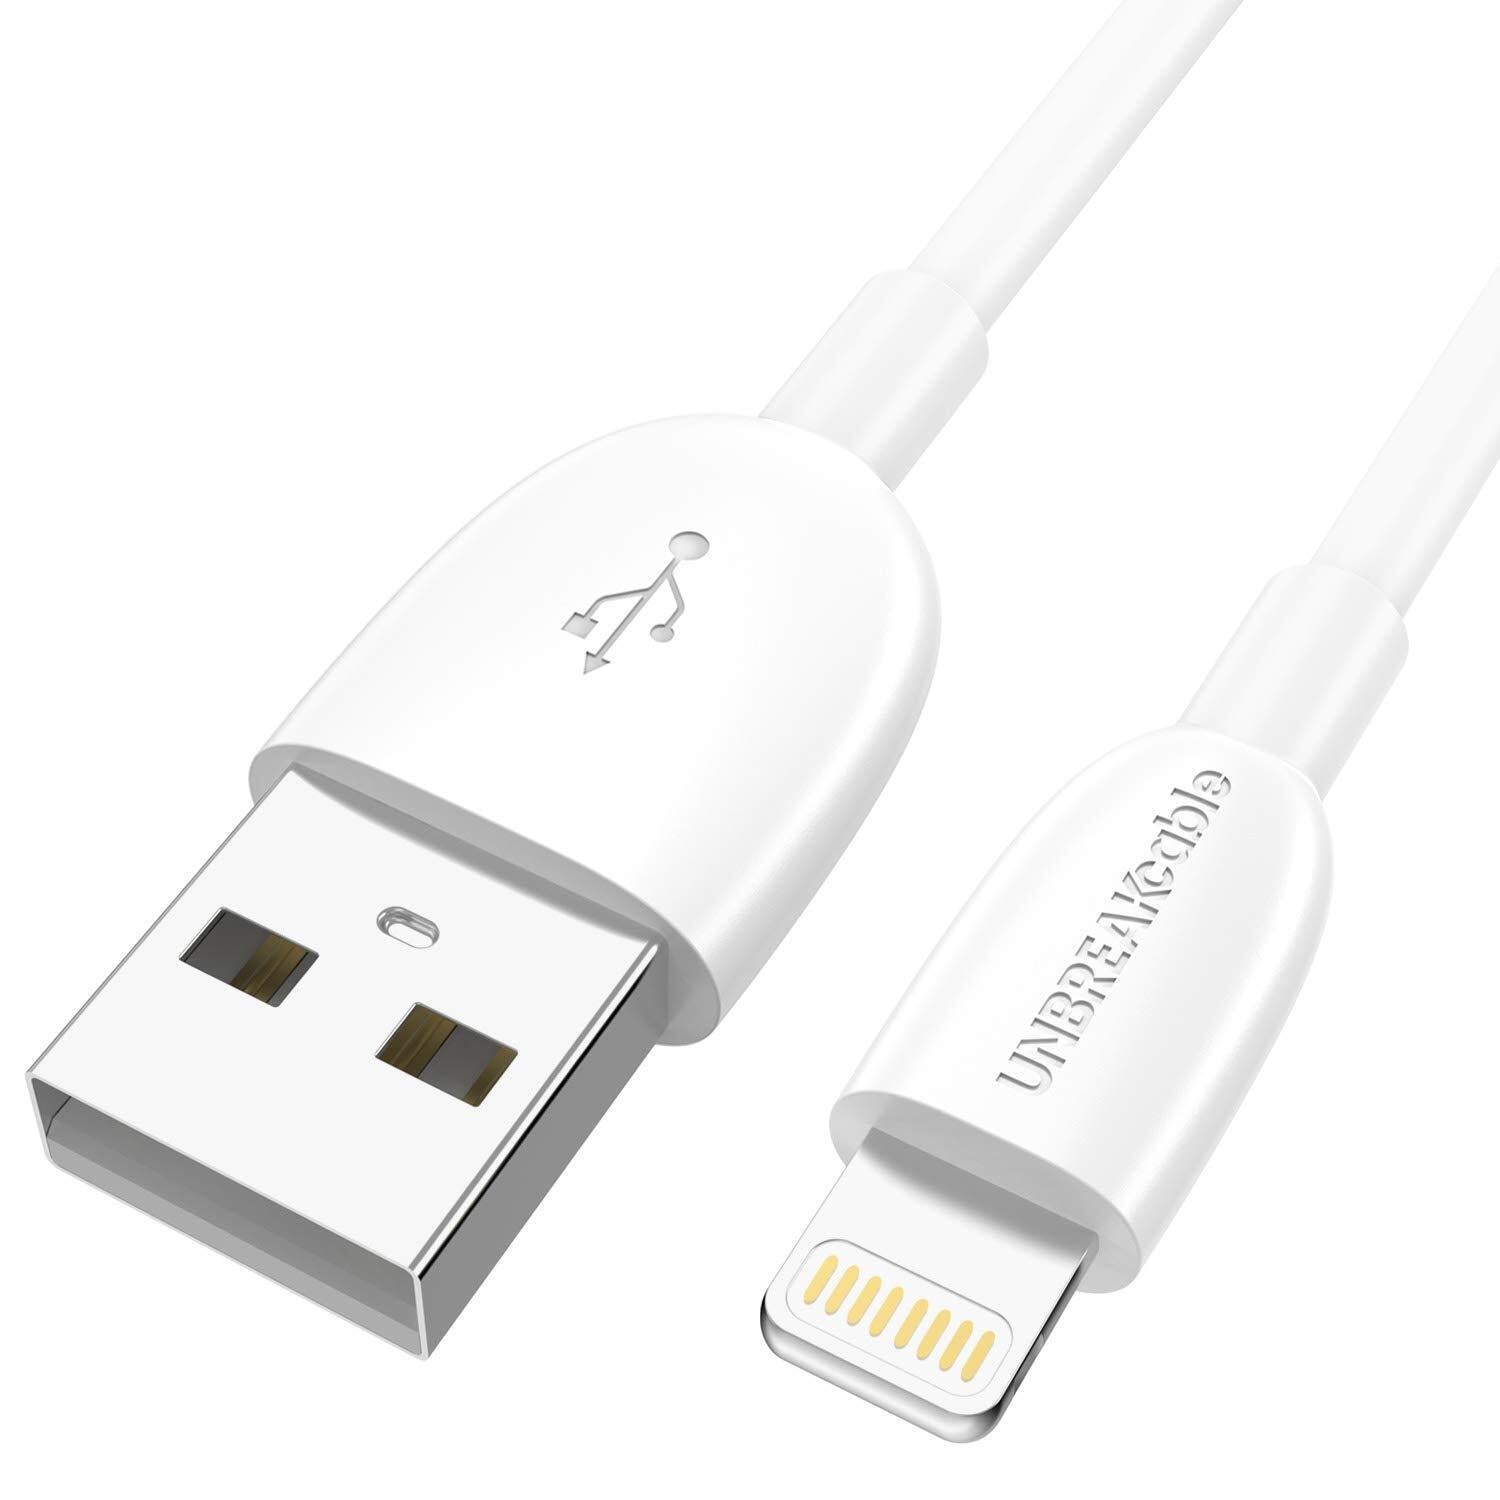 UNBREAKcable Apple MFi Certified USB C to Lightning Charging Cable - RRP £12.99 - RLO Tech